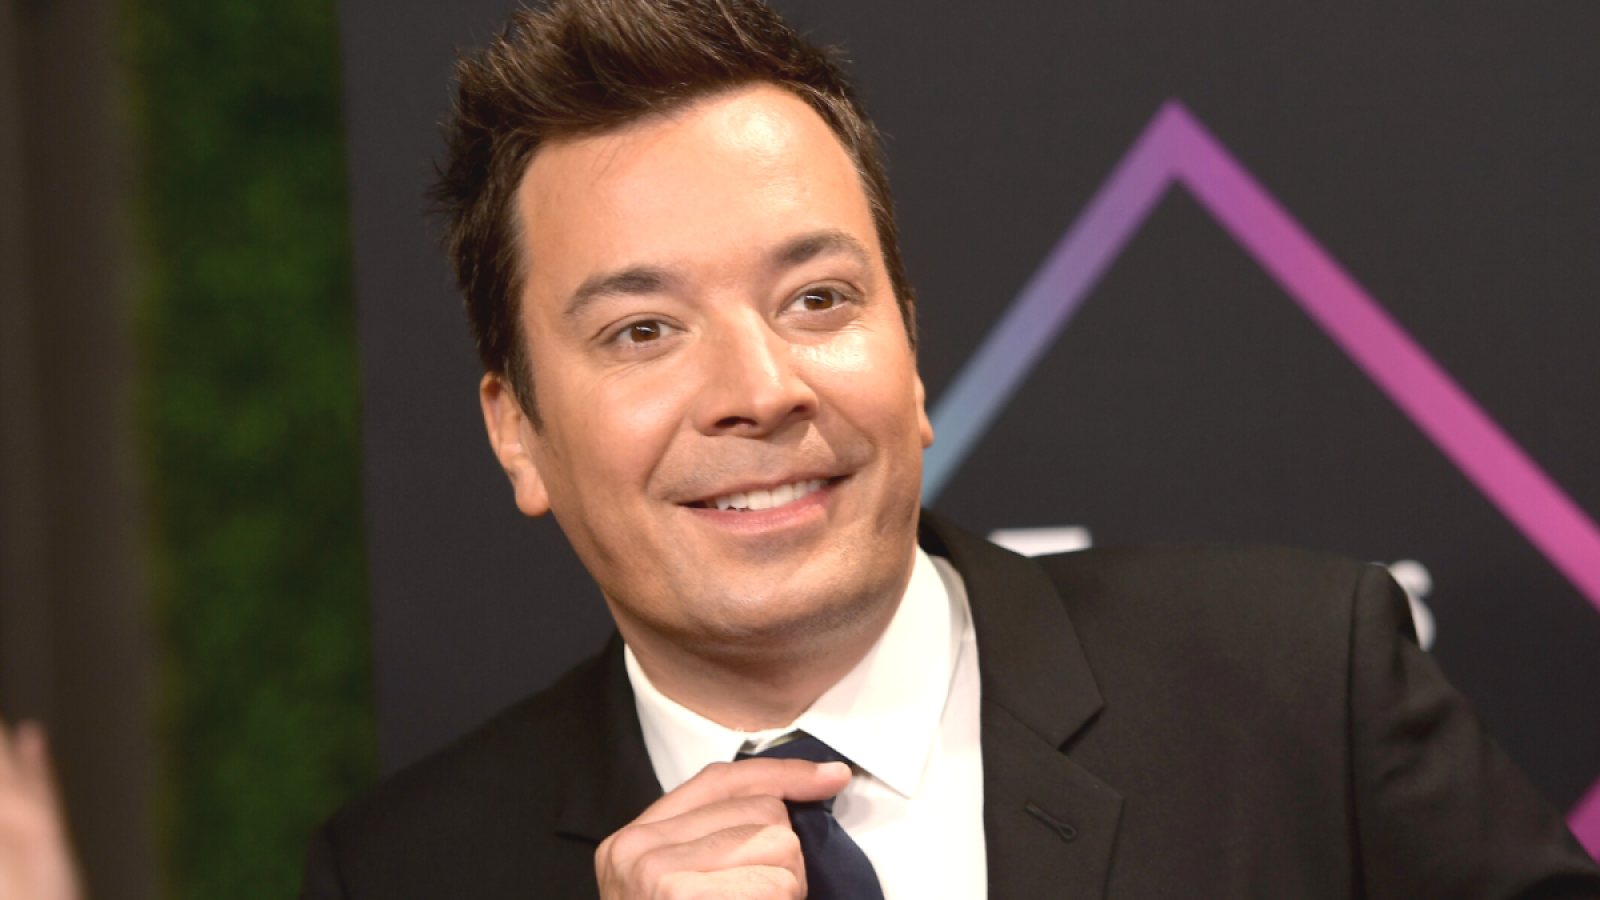 For Those Worried, Jimmy Fallon Has Confirmed That Yes, He Is Alive